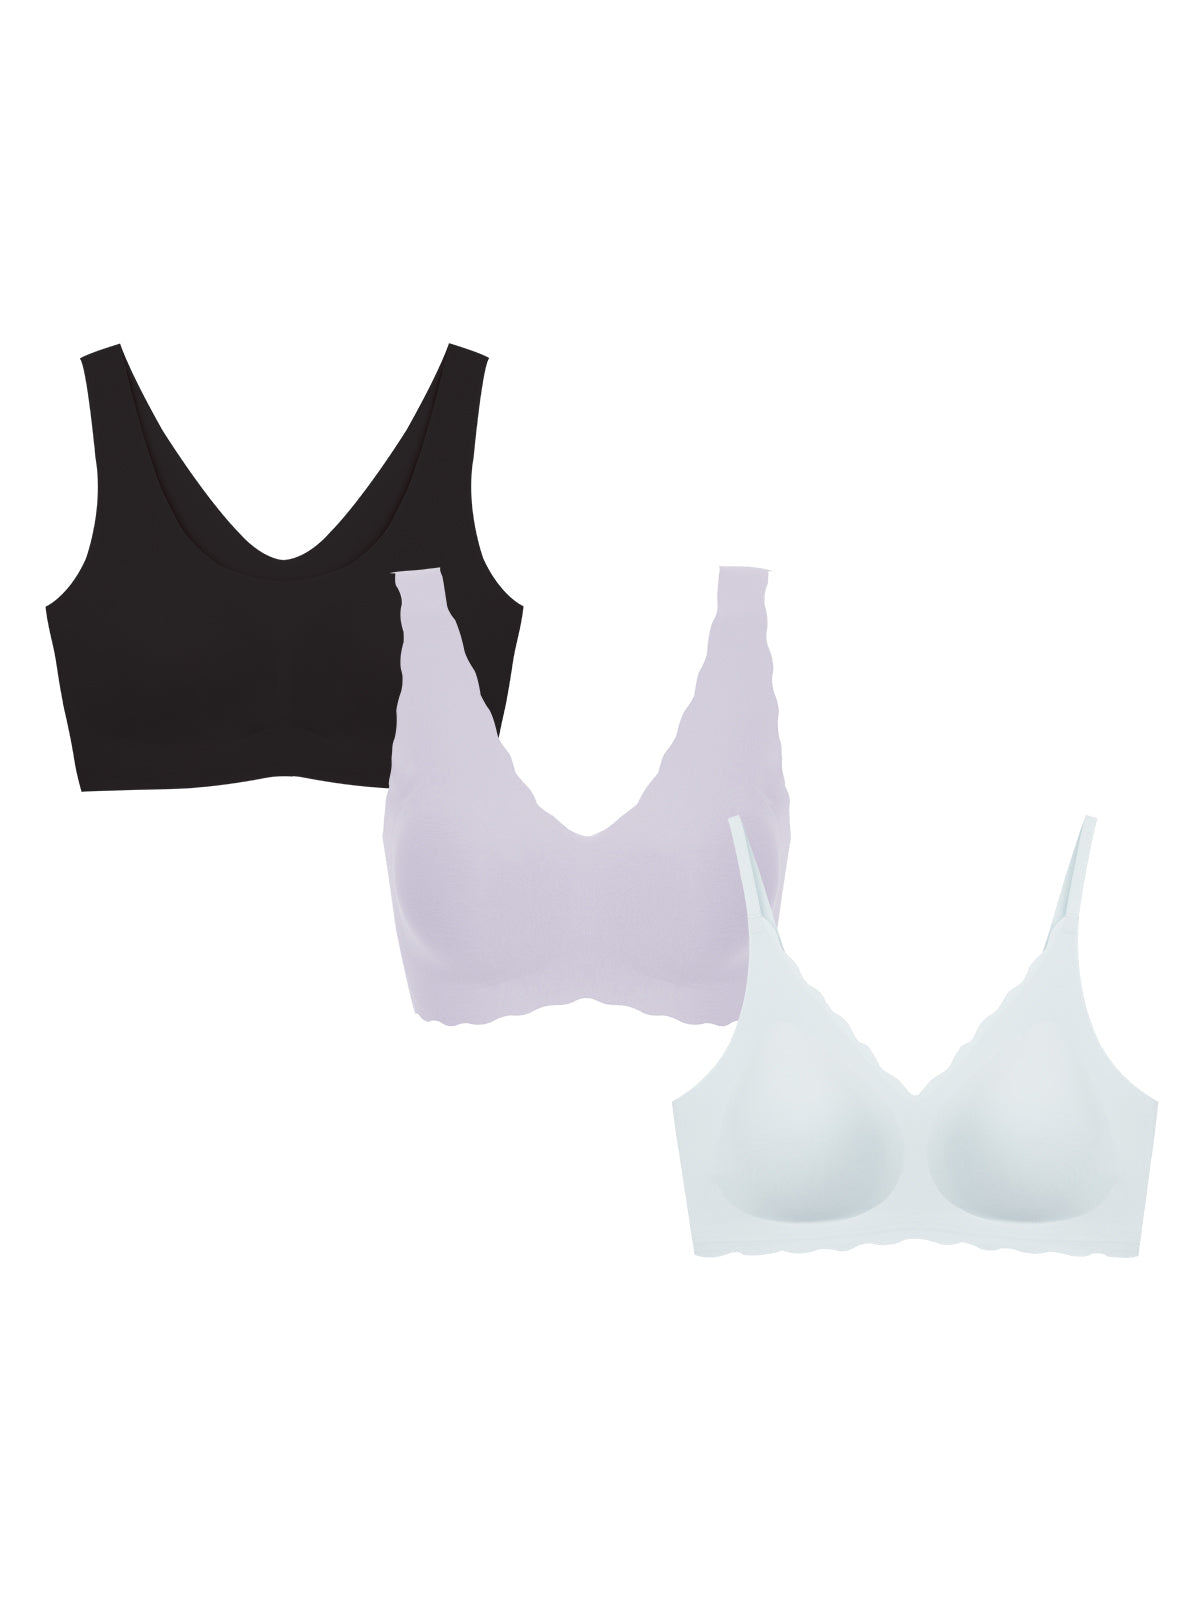 Comfy Bras, Most Confortable Bras for 24h Use